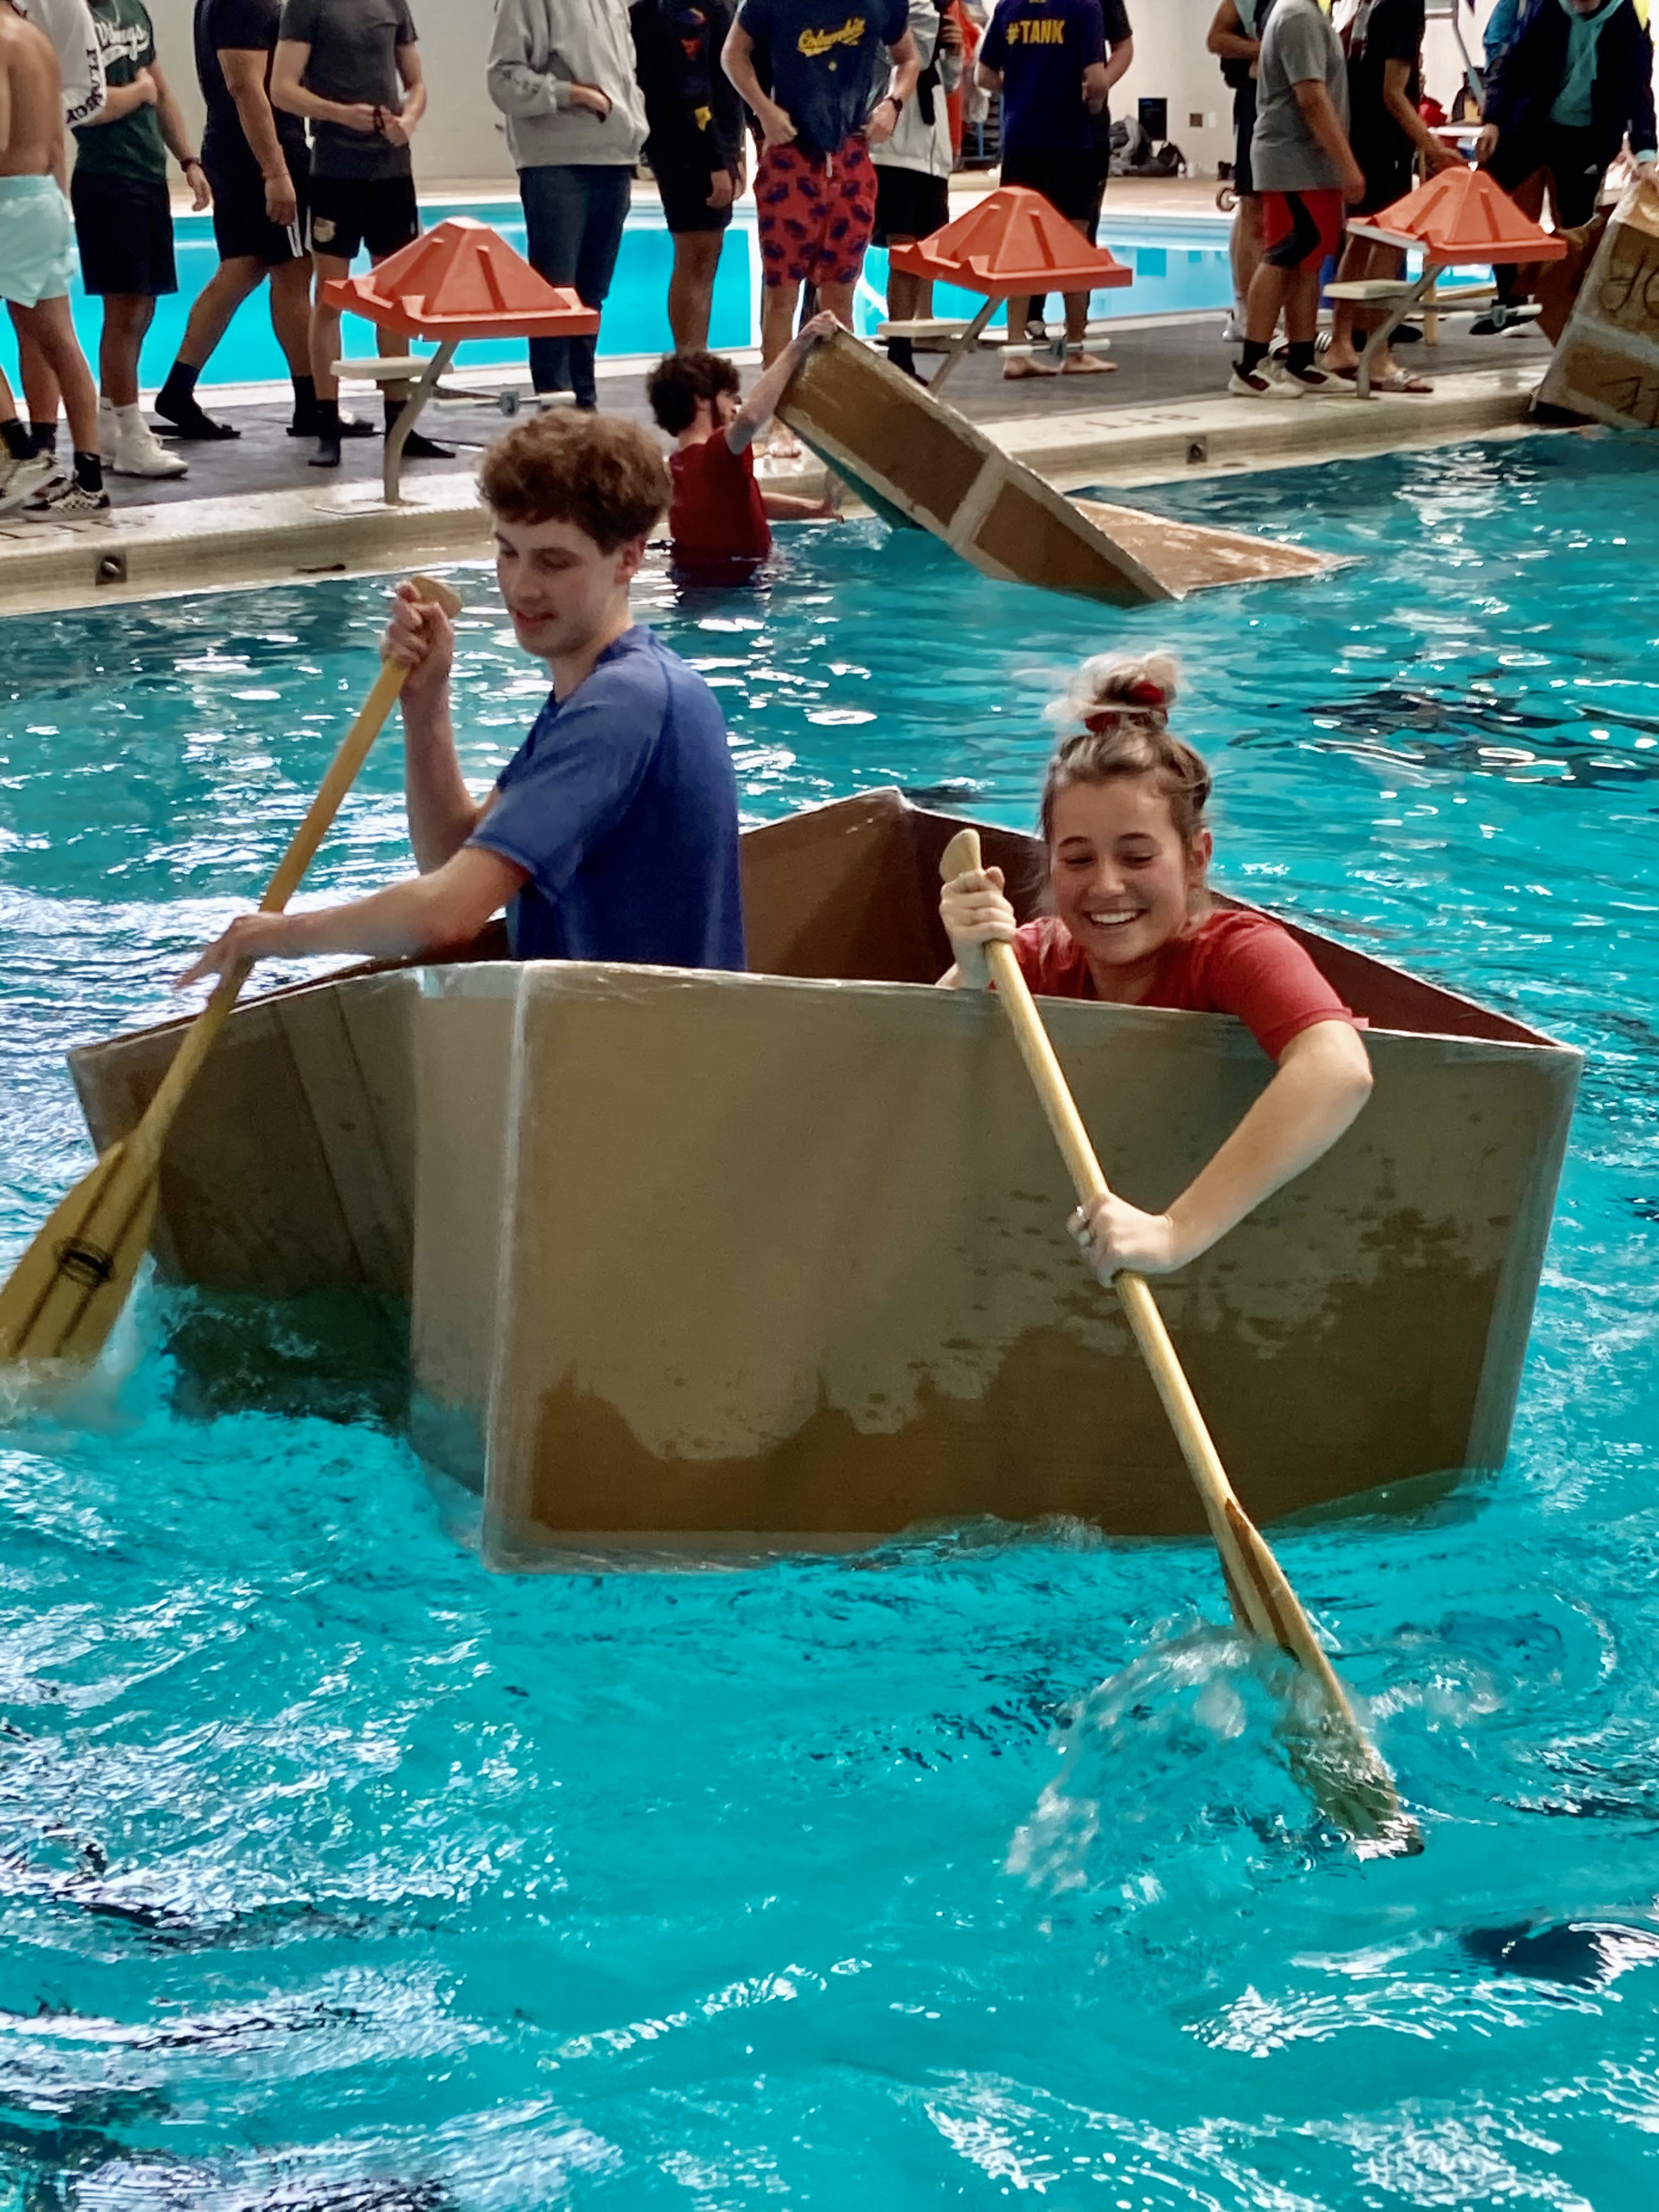 Lakewood High School physics students paddle, sink and swim during